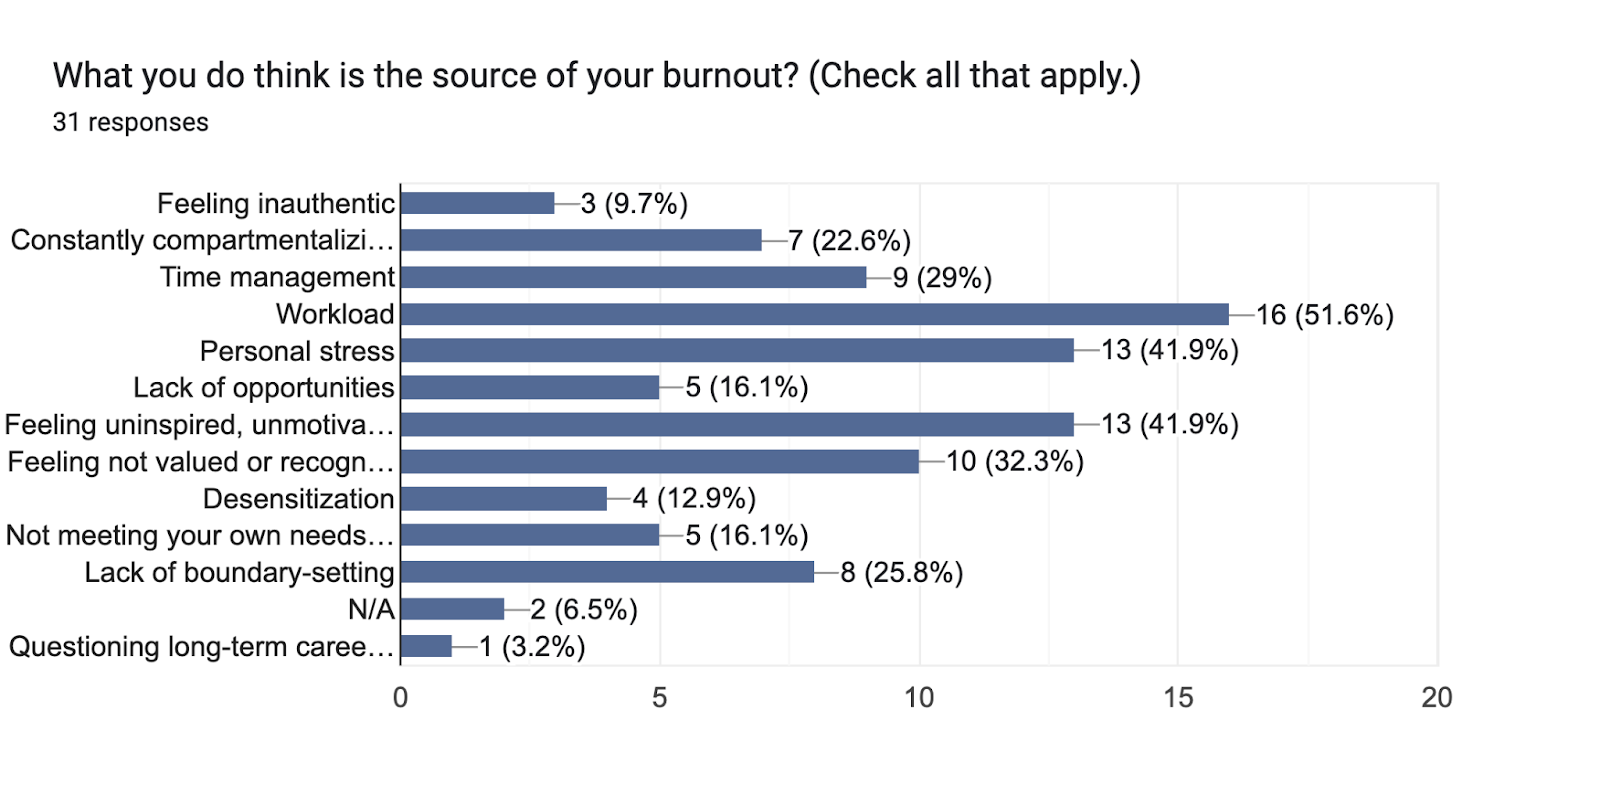 Forms response chart. Question title: What you do think is the source of your burnout? (Check all that apply.). Number of responses: 31 responses.